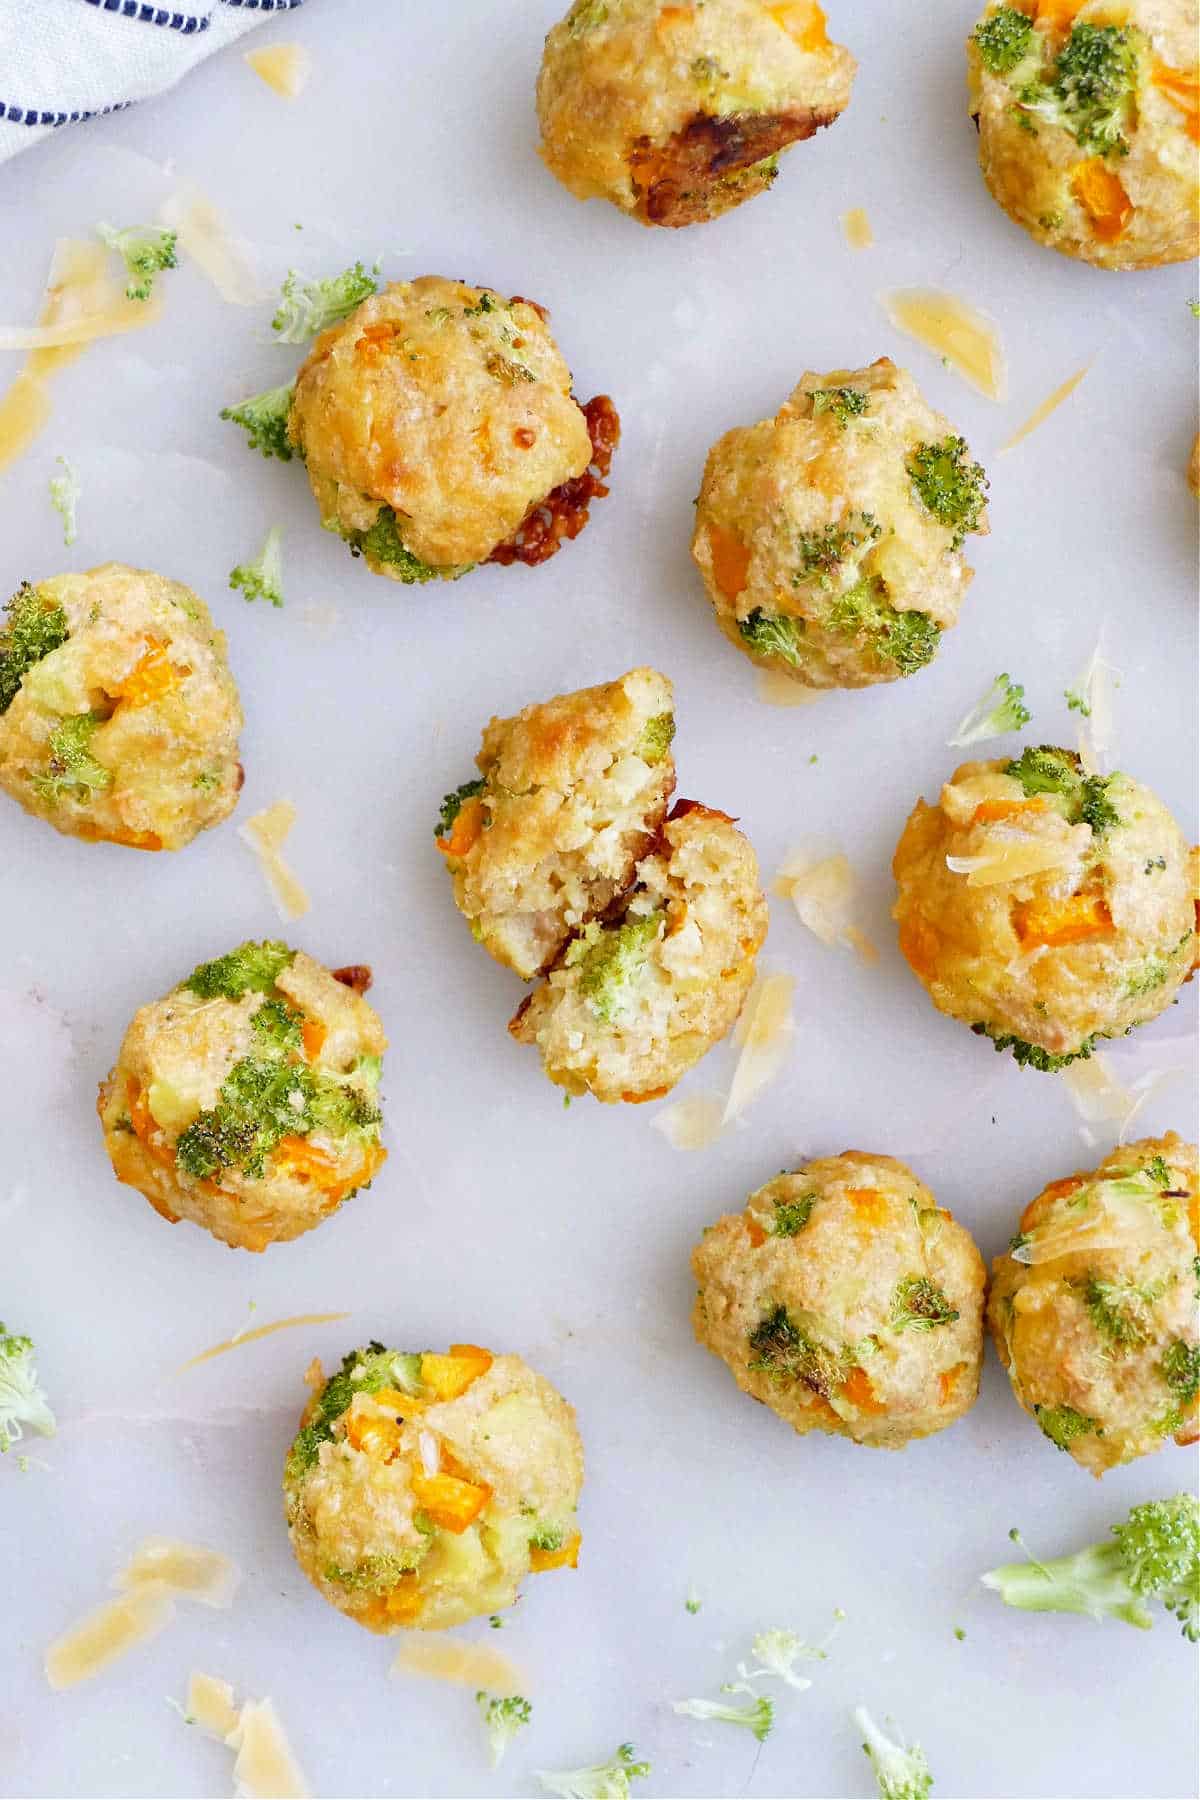 homemade veggie cheese bites next to each other on a counter